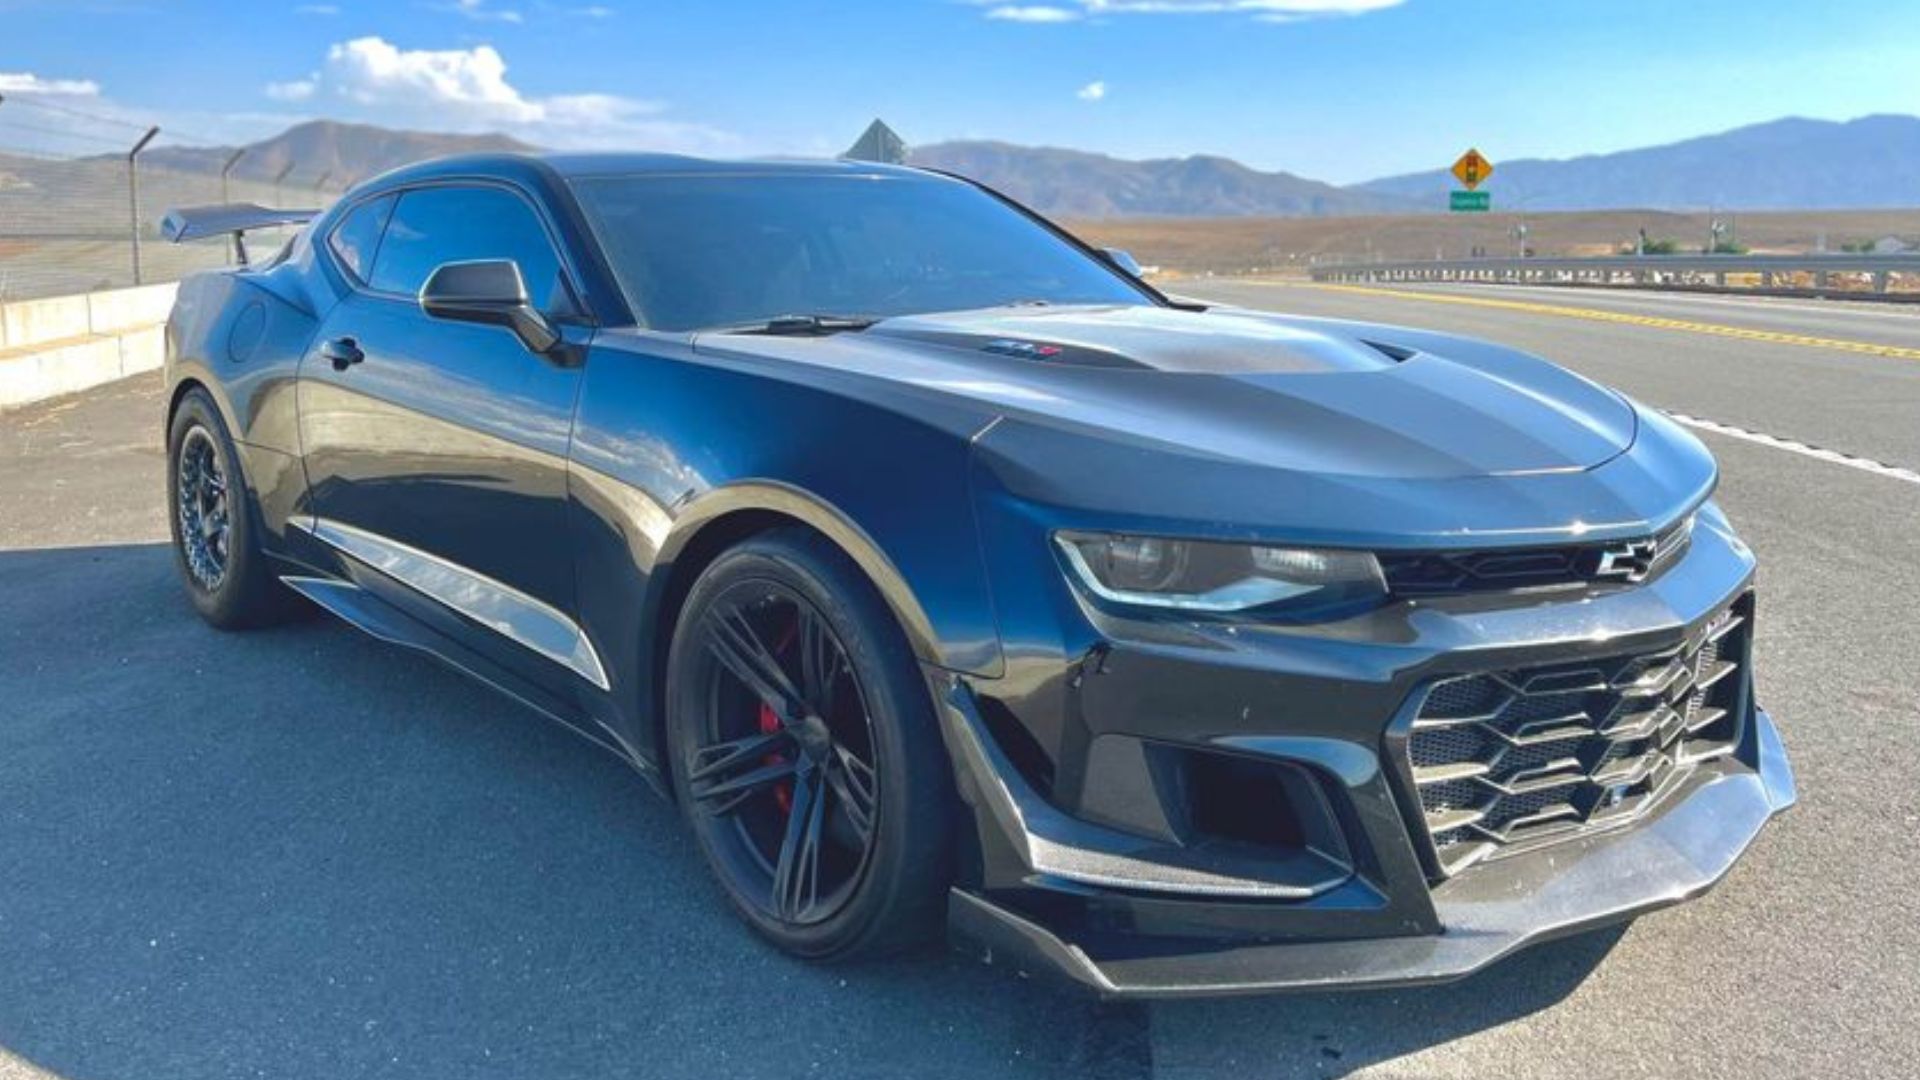 Carvana Sells A Stolen Camaro ZL1, Which Police Confiscate